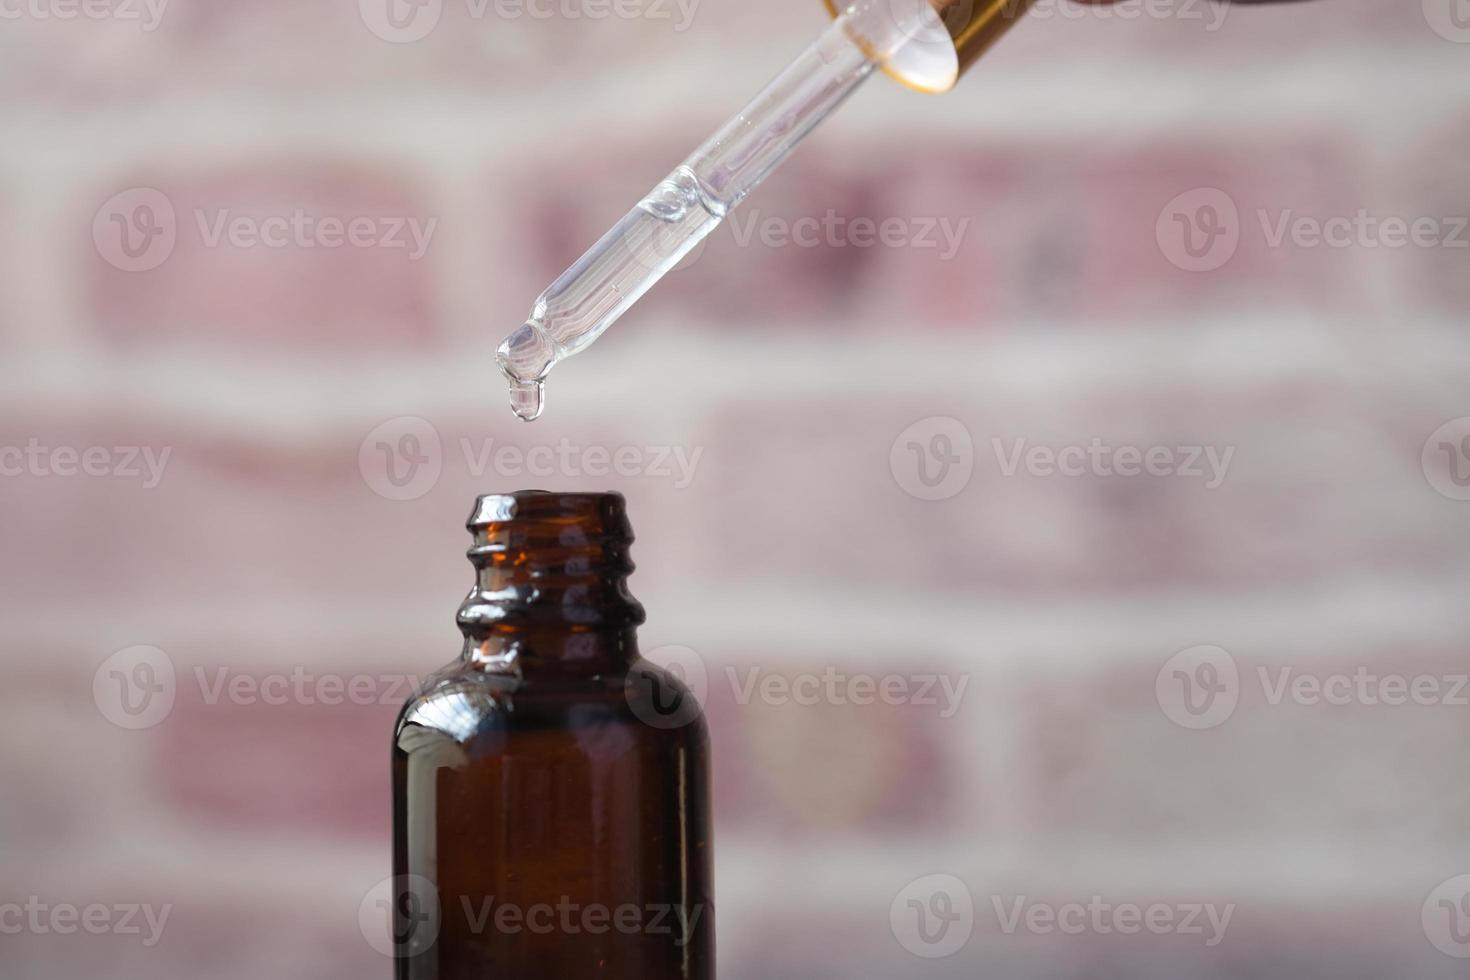 Drop falls from a pipette into a cosmetic bottle photo